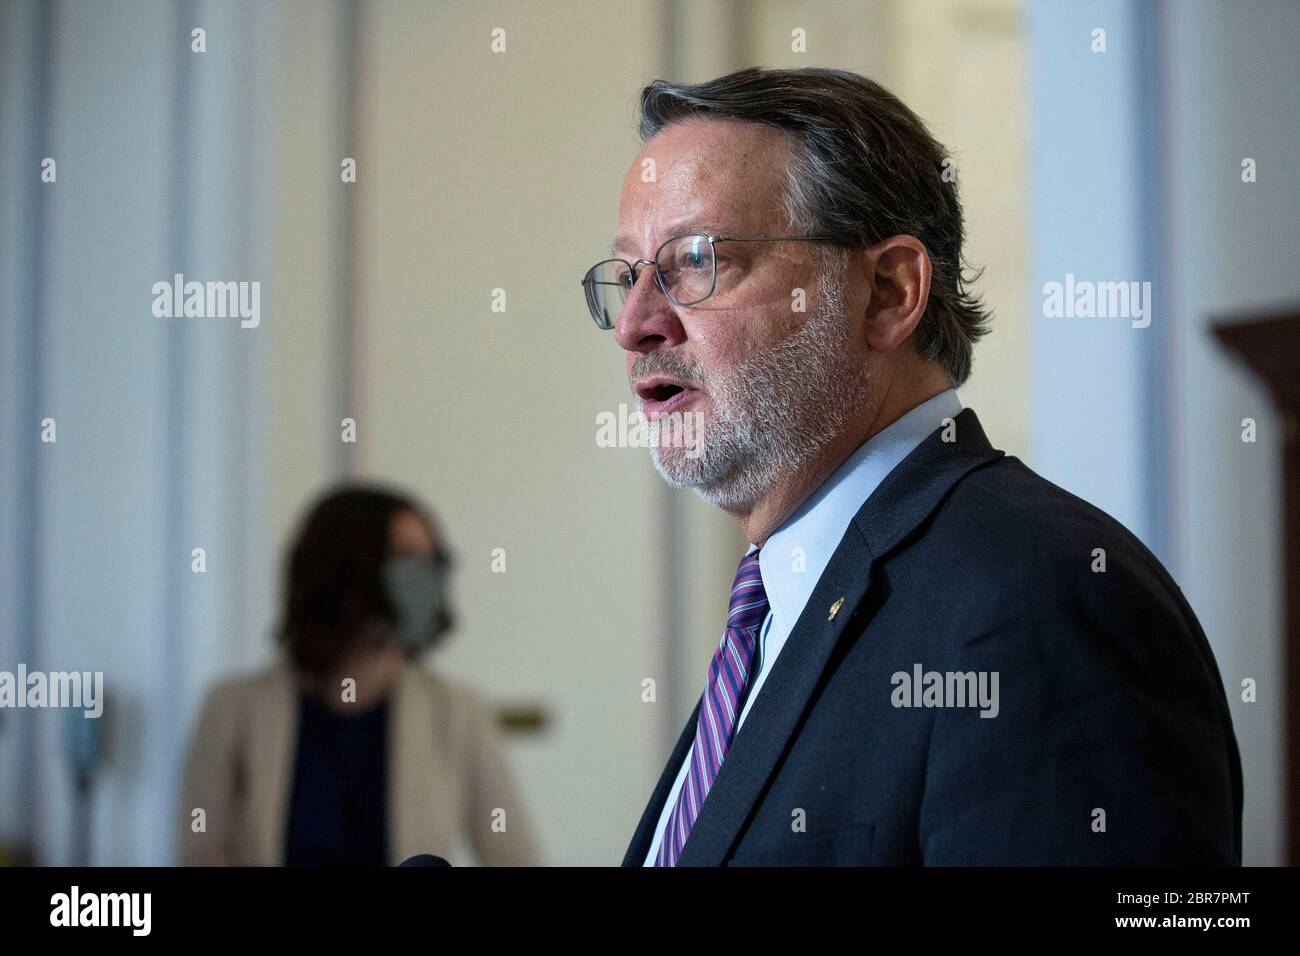 Washington, United States Of America. 20th May, 2020. United States Senator Gary Peters (Democrat of Michigan) speaks to members of the media following a U.S. Senate Committee on Homeland Security and Governmental Affairs meeting in the Senate Russell Office Building in Washington, DC, U.S., on Wednesday, May 20, 2020, to consider a motion to issue a subpoena to Blue Star Strategies. Credit: Stefani Reynolds/CNP/AdMedia/Newscom/Alamy Live News Stock Photo